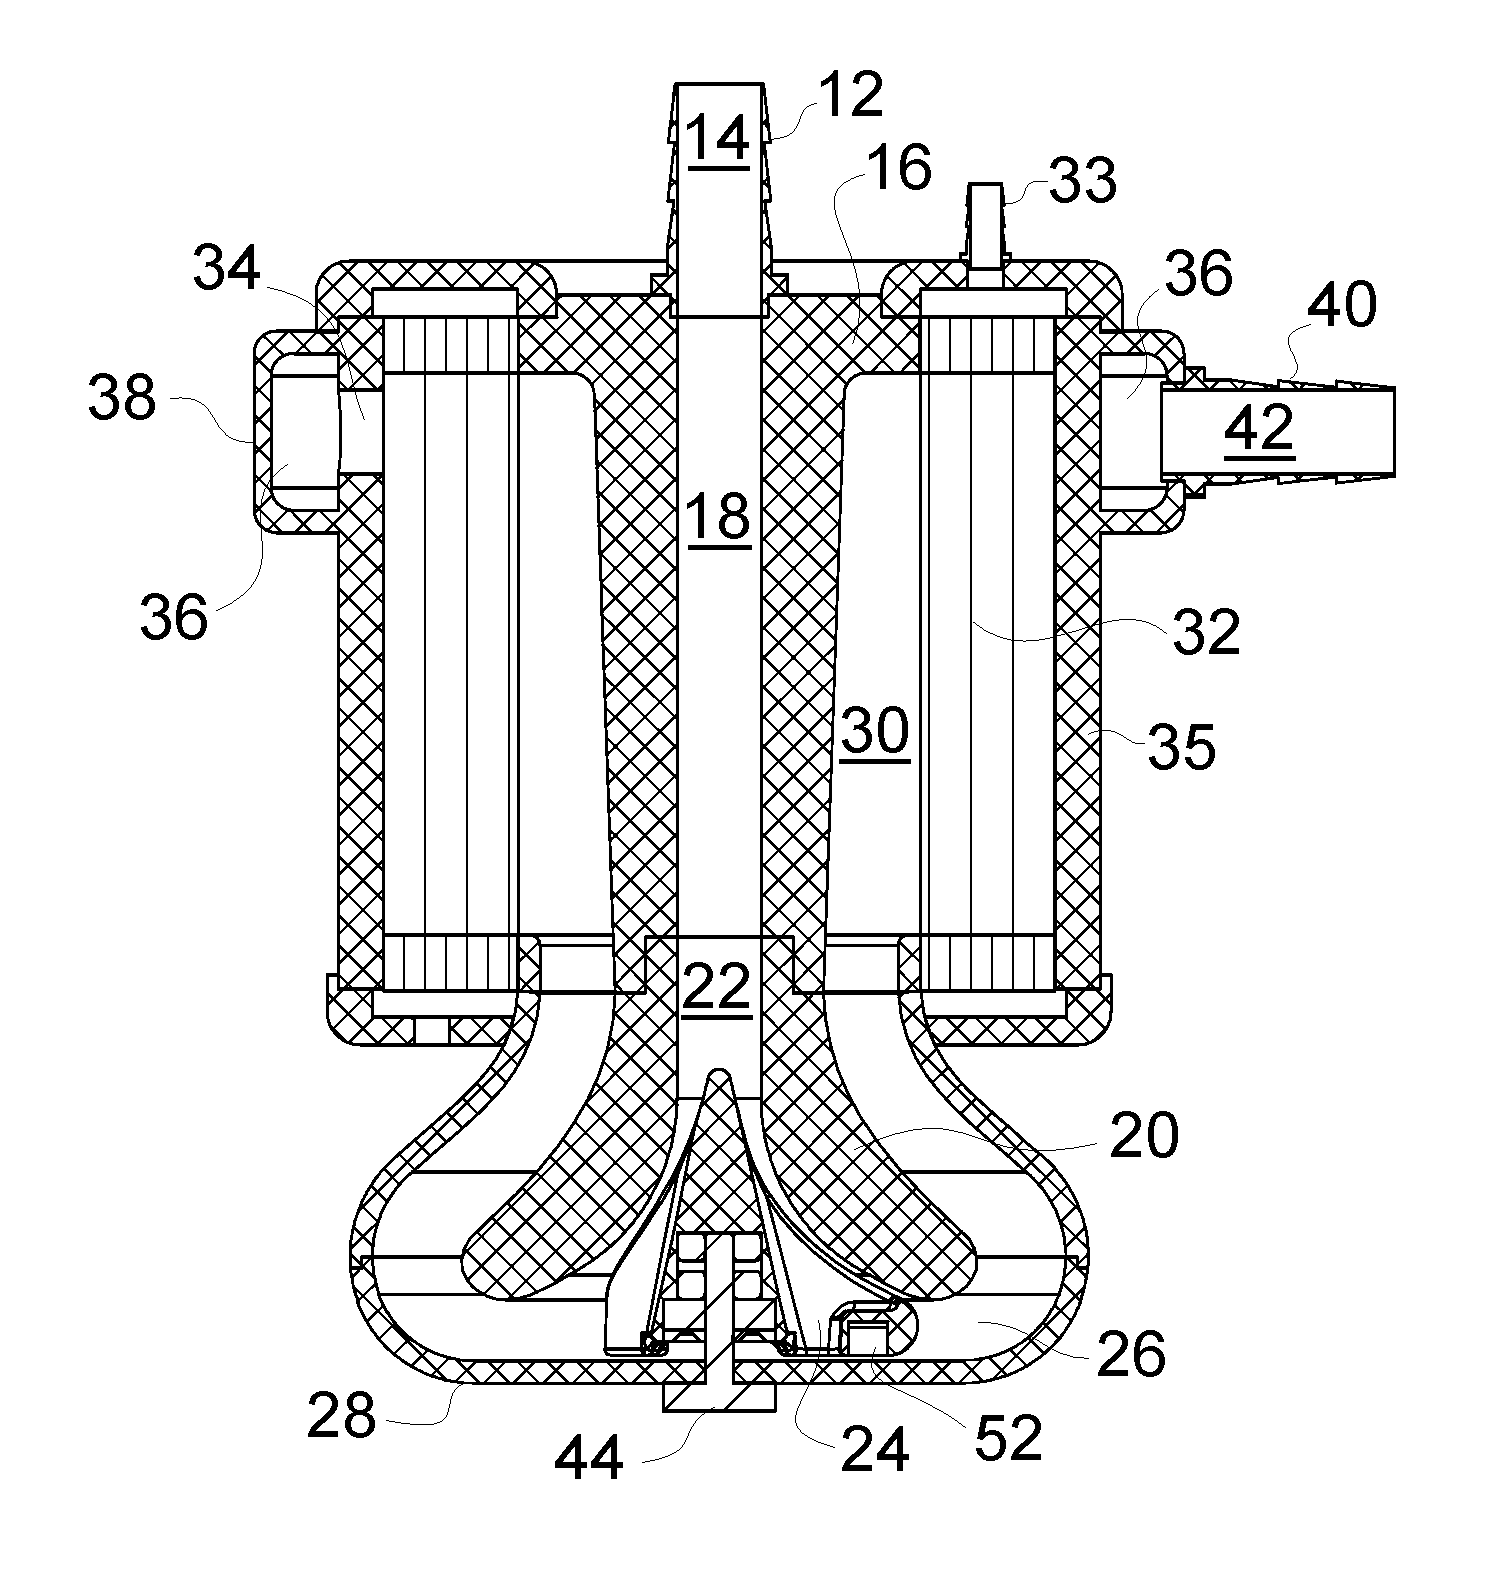 Compact integrated blood pump oxygenator or gas transfer device with hydrogel impeller packing material and rollover impeller outlet